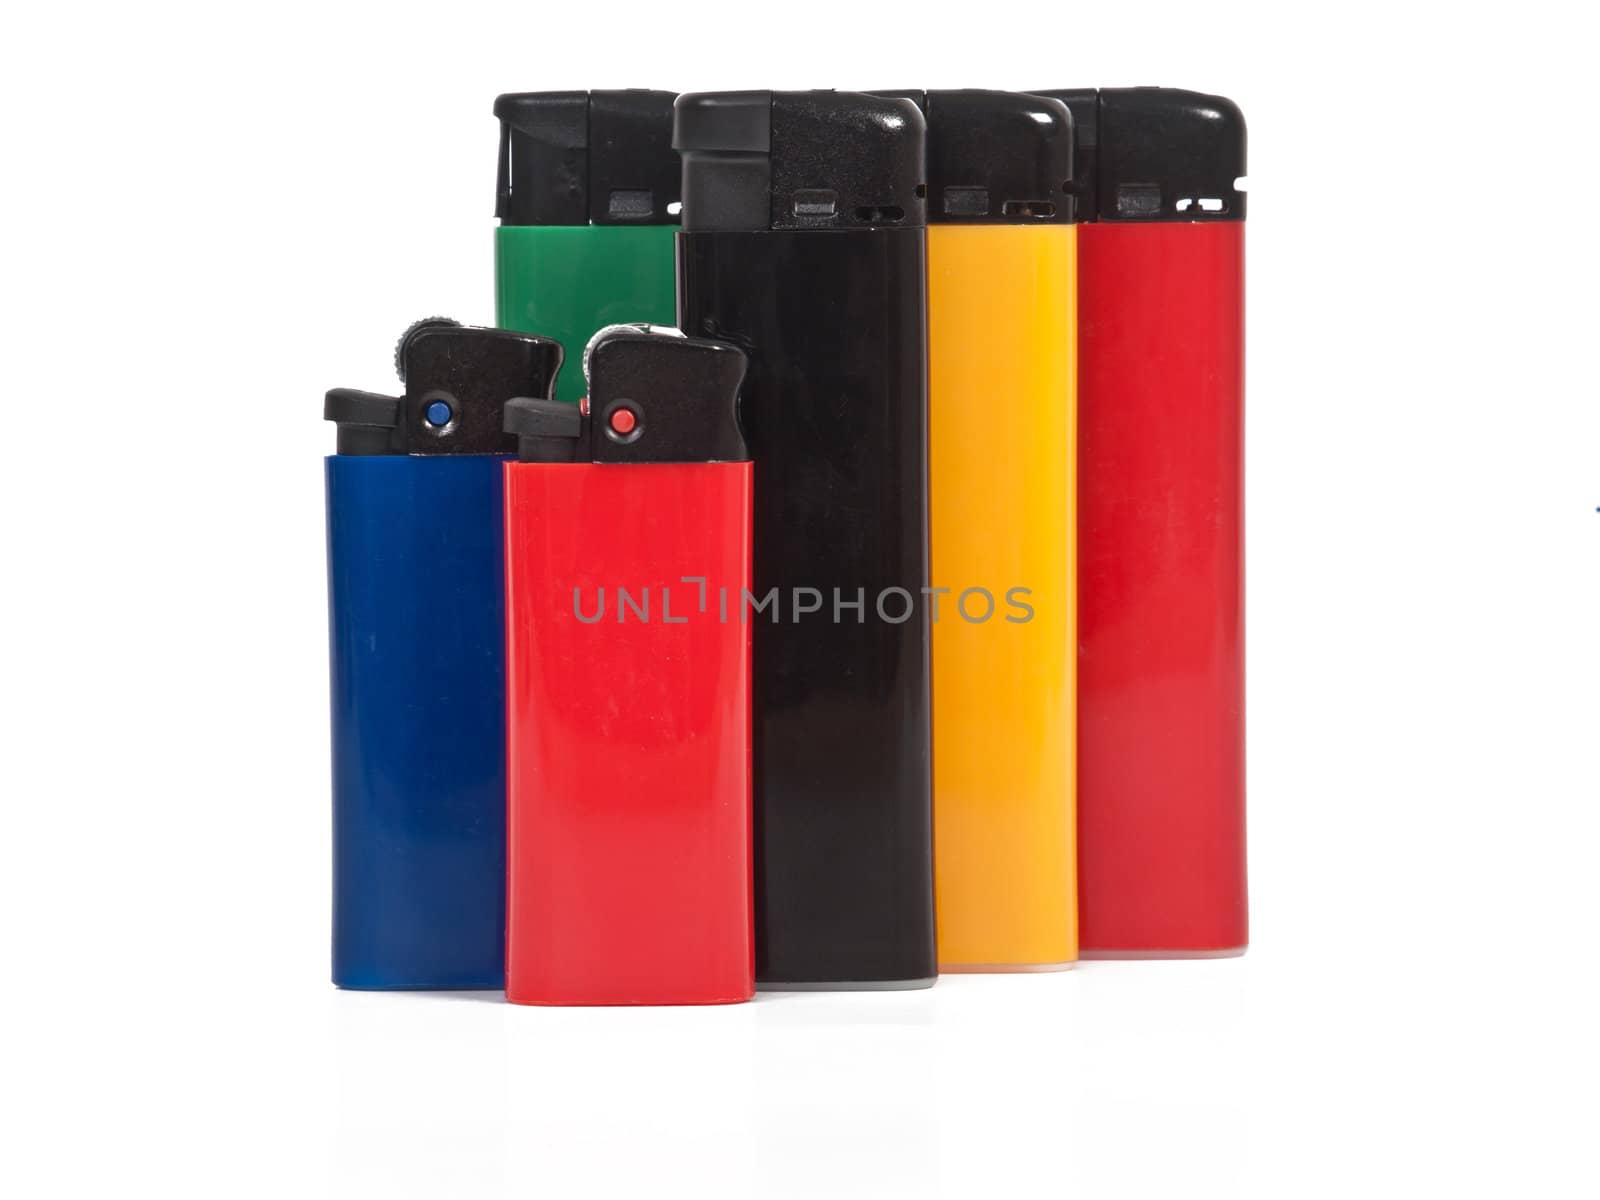 four colorful lighters, and two little lighters